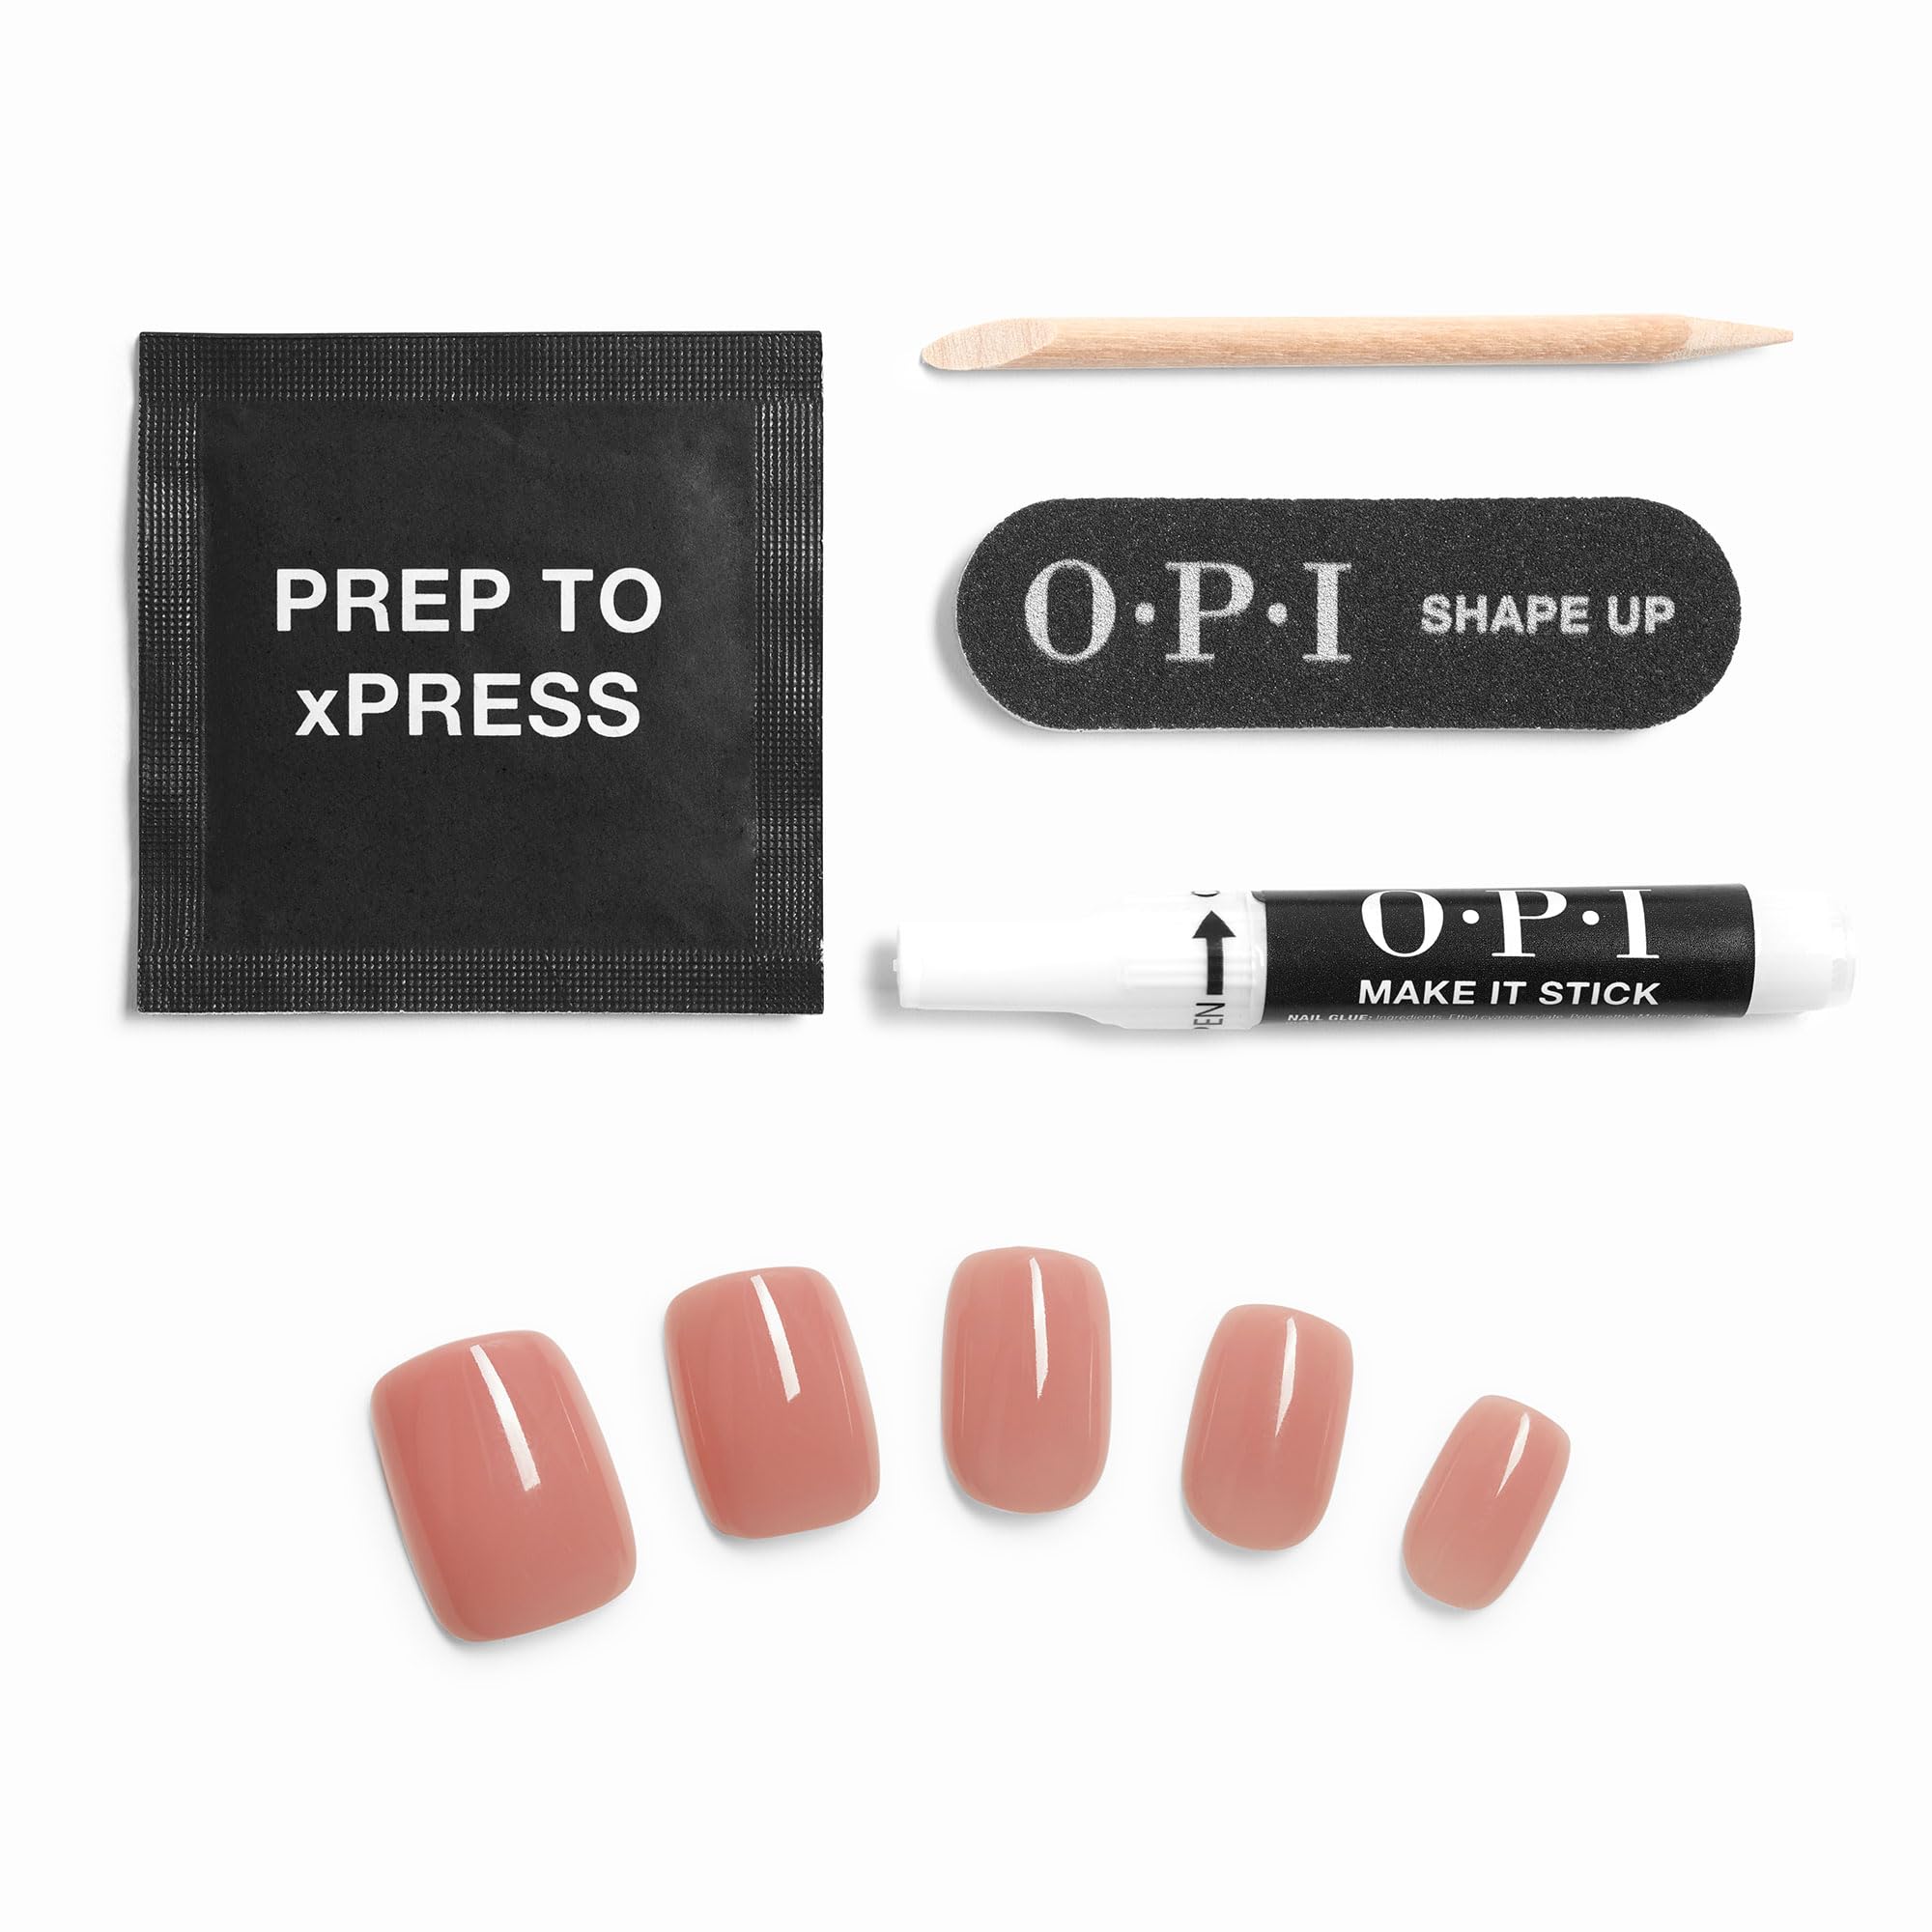 OPI xPRESS/ON Press On Nails, Up to 14 Days of Wear, Gel-Like Salon Manicure, Vegan, Sustainable Packaging, With Nail Glue, Short Neutral Nails, Somewhere Over the Rainbow Mountains